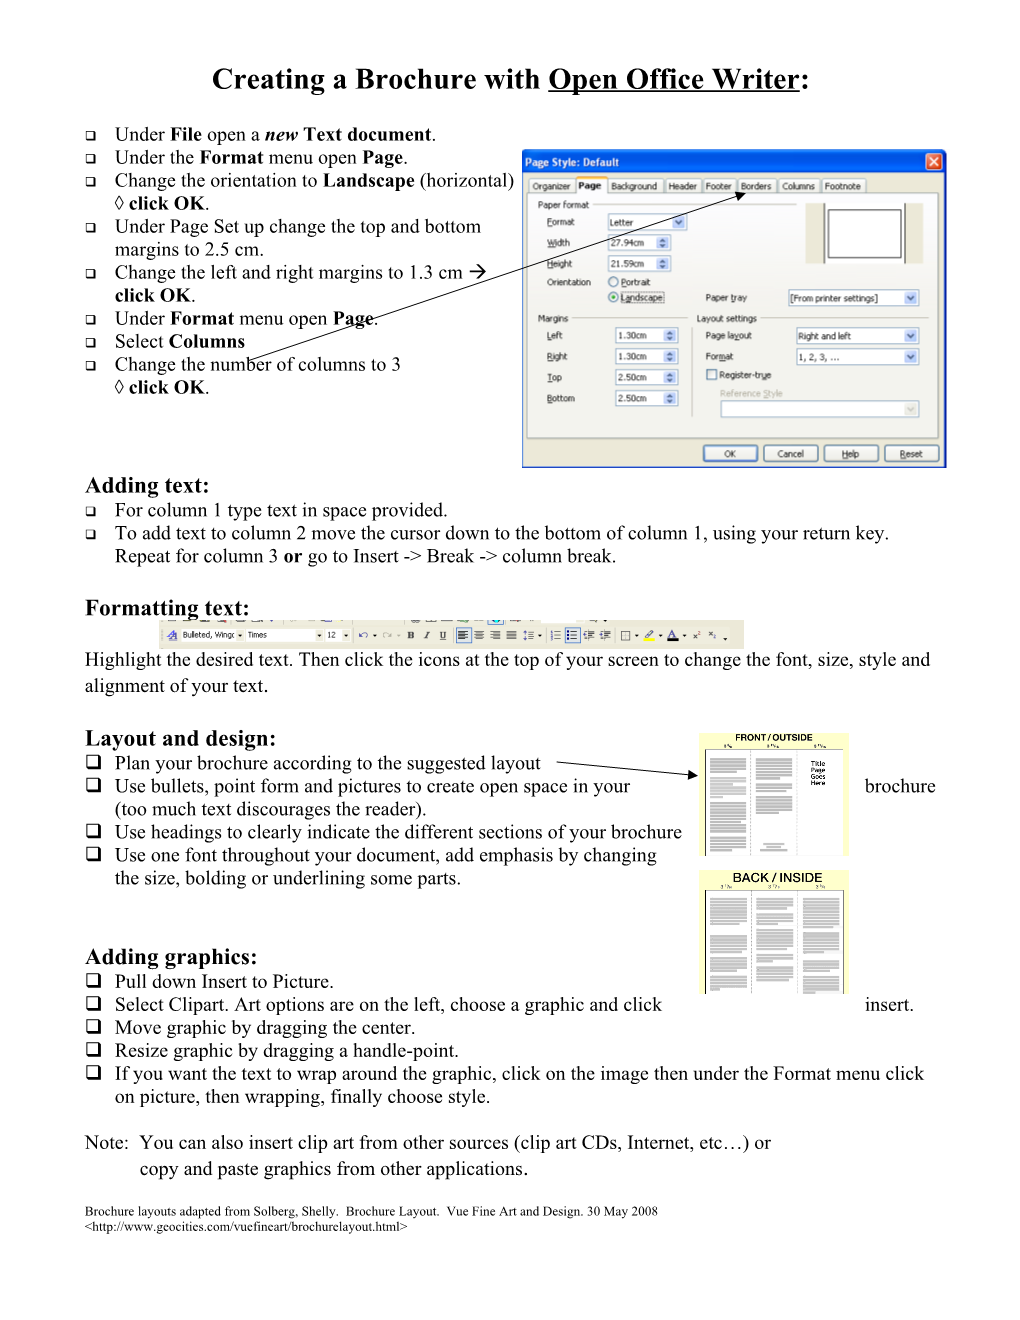 Creating a Brochure with Microsoft Word